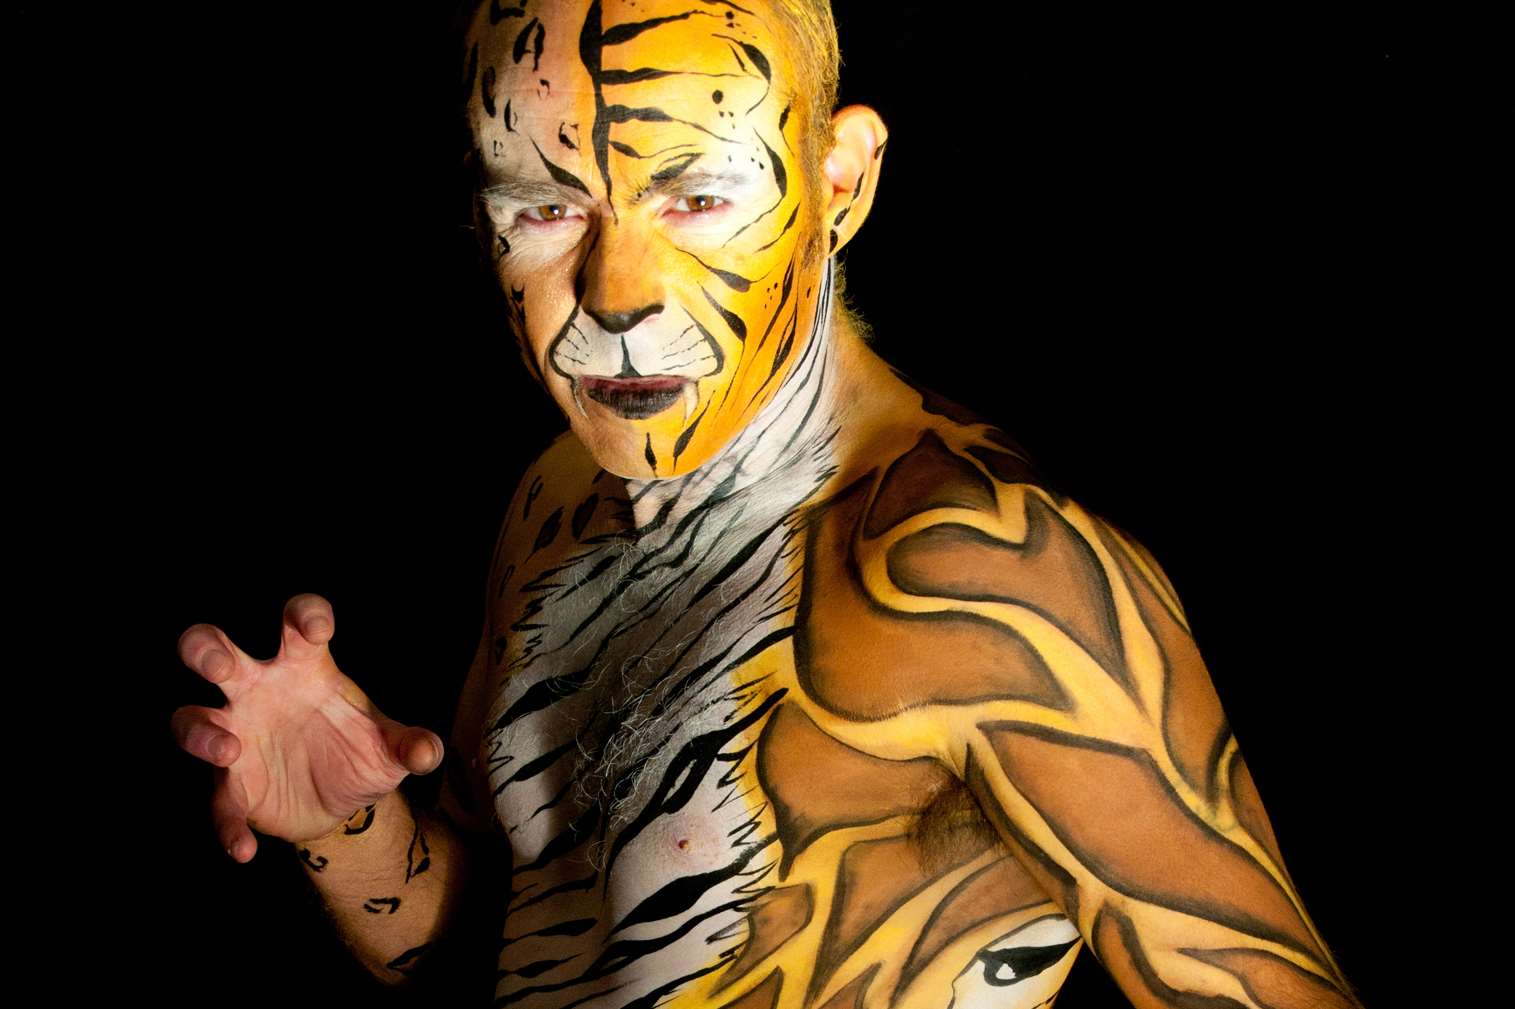 Face and body painting was carried out by Billious Hoyle. Here is Marcus Joy posing for his month's photo. Picture: Albane McGuinness